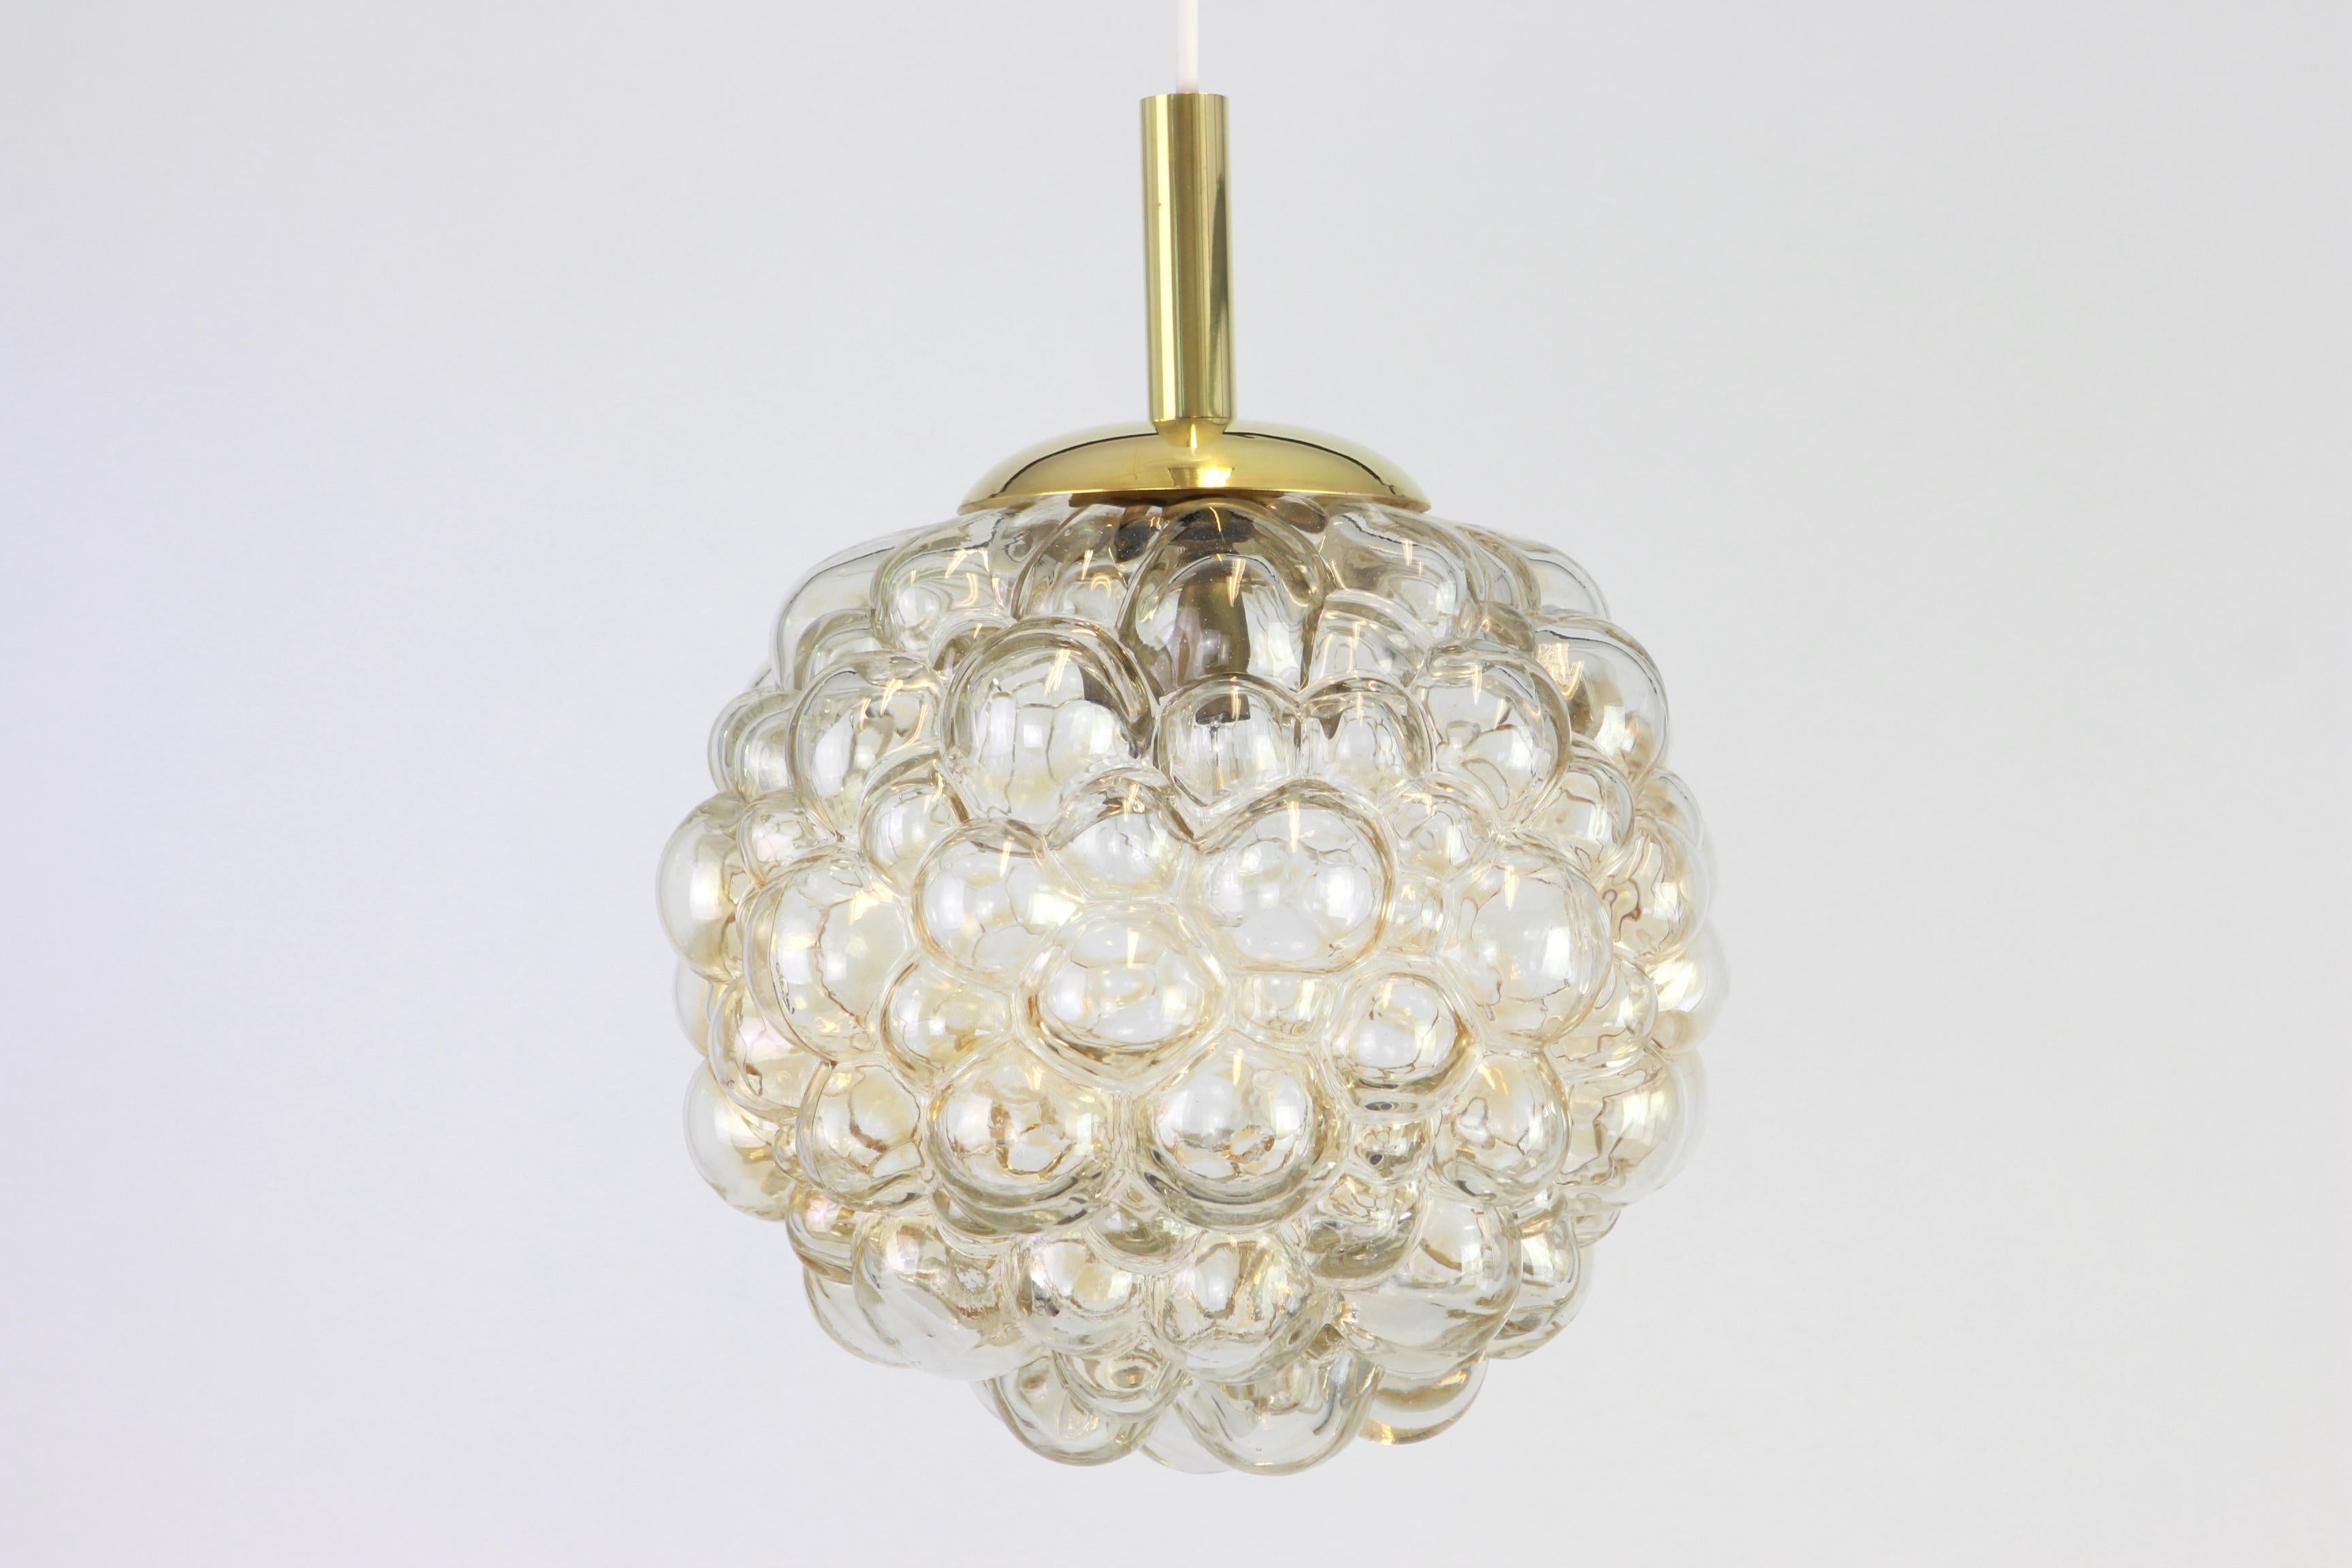 A large round with light smoke tone bubble glass pendant designed by Helena Tynell for Limburg, manufactured in Germany, circa 1970s

Sockets: It needs 1 x E27 standard bulb.
Measure: Diameter 30 cm // 12 inches
Height (adjustable) 80 cm // 31.5